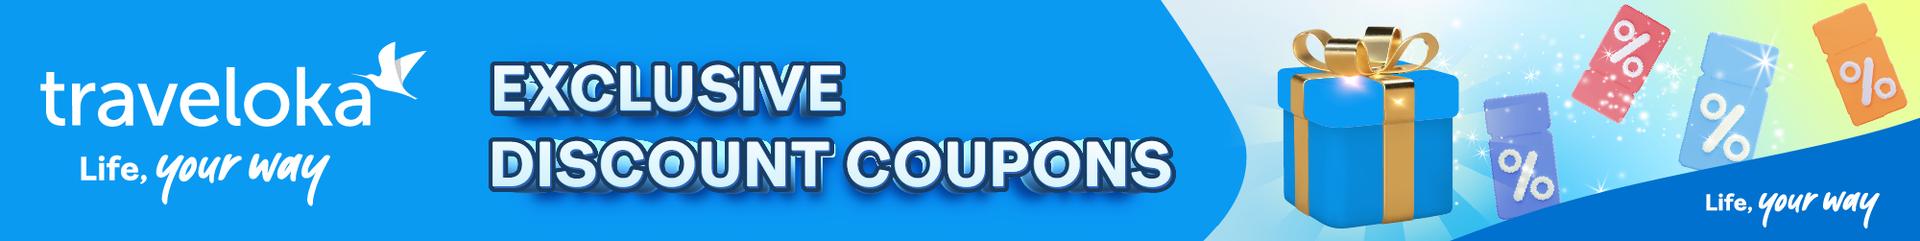 Exclusive Coupons for New Users